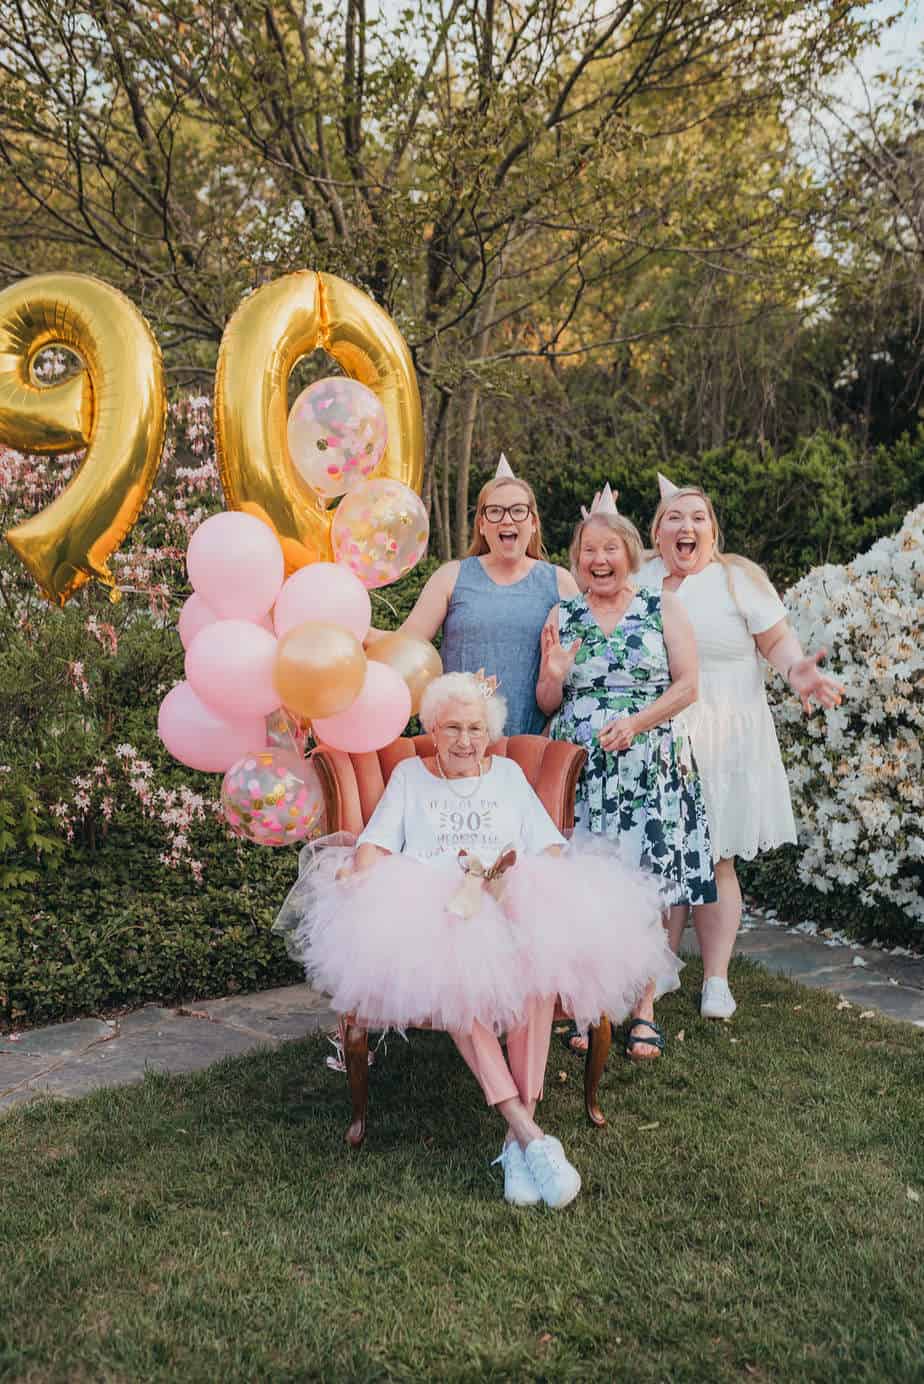 A grandma with her daugther and two grandaughters during her 90th birthday